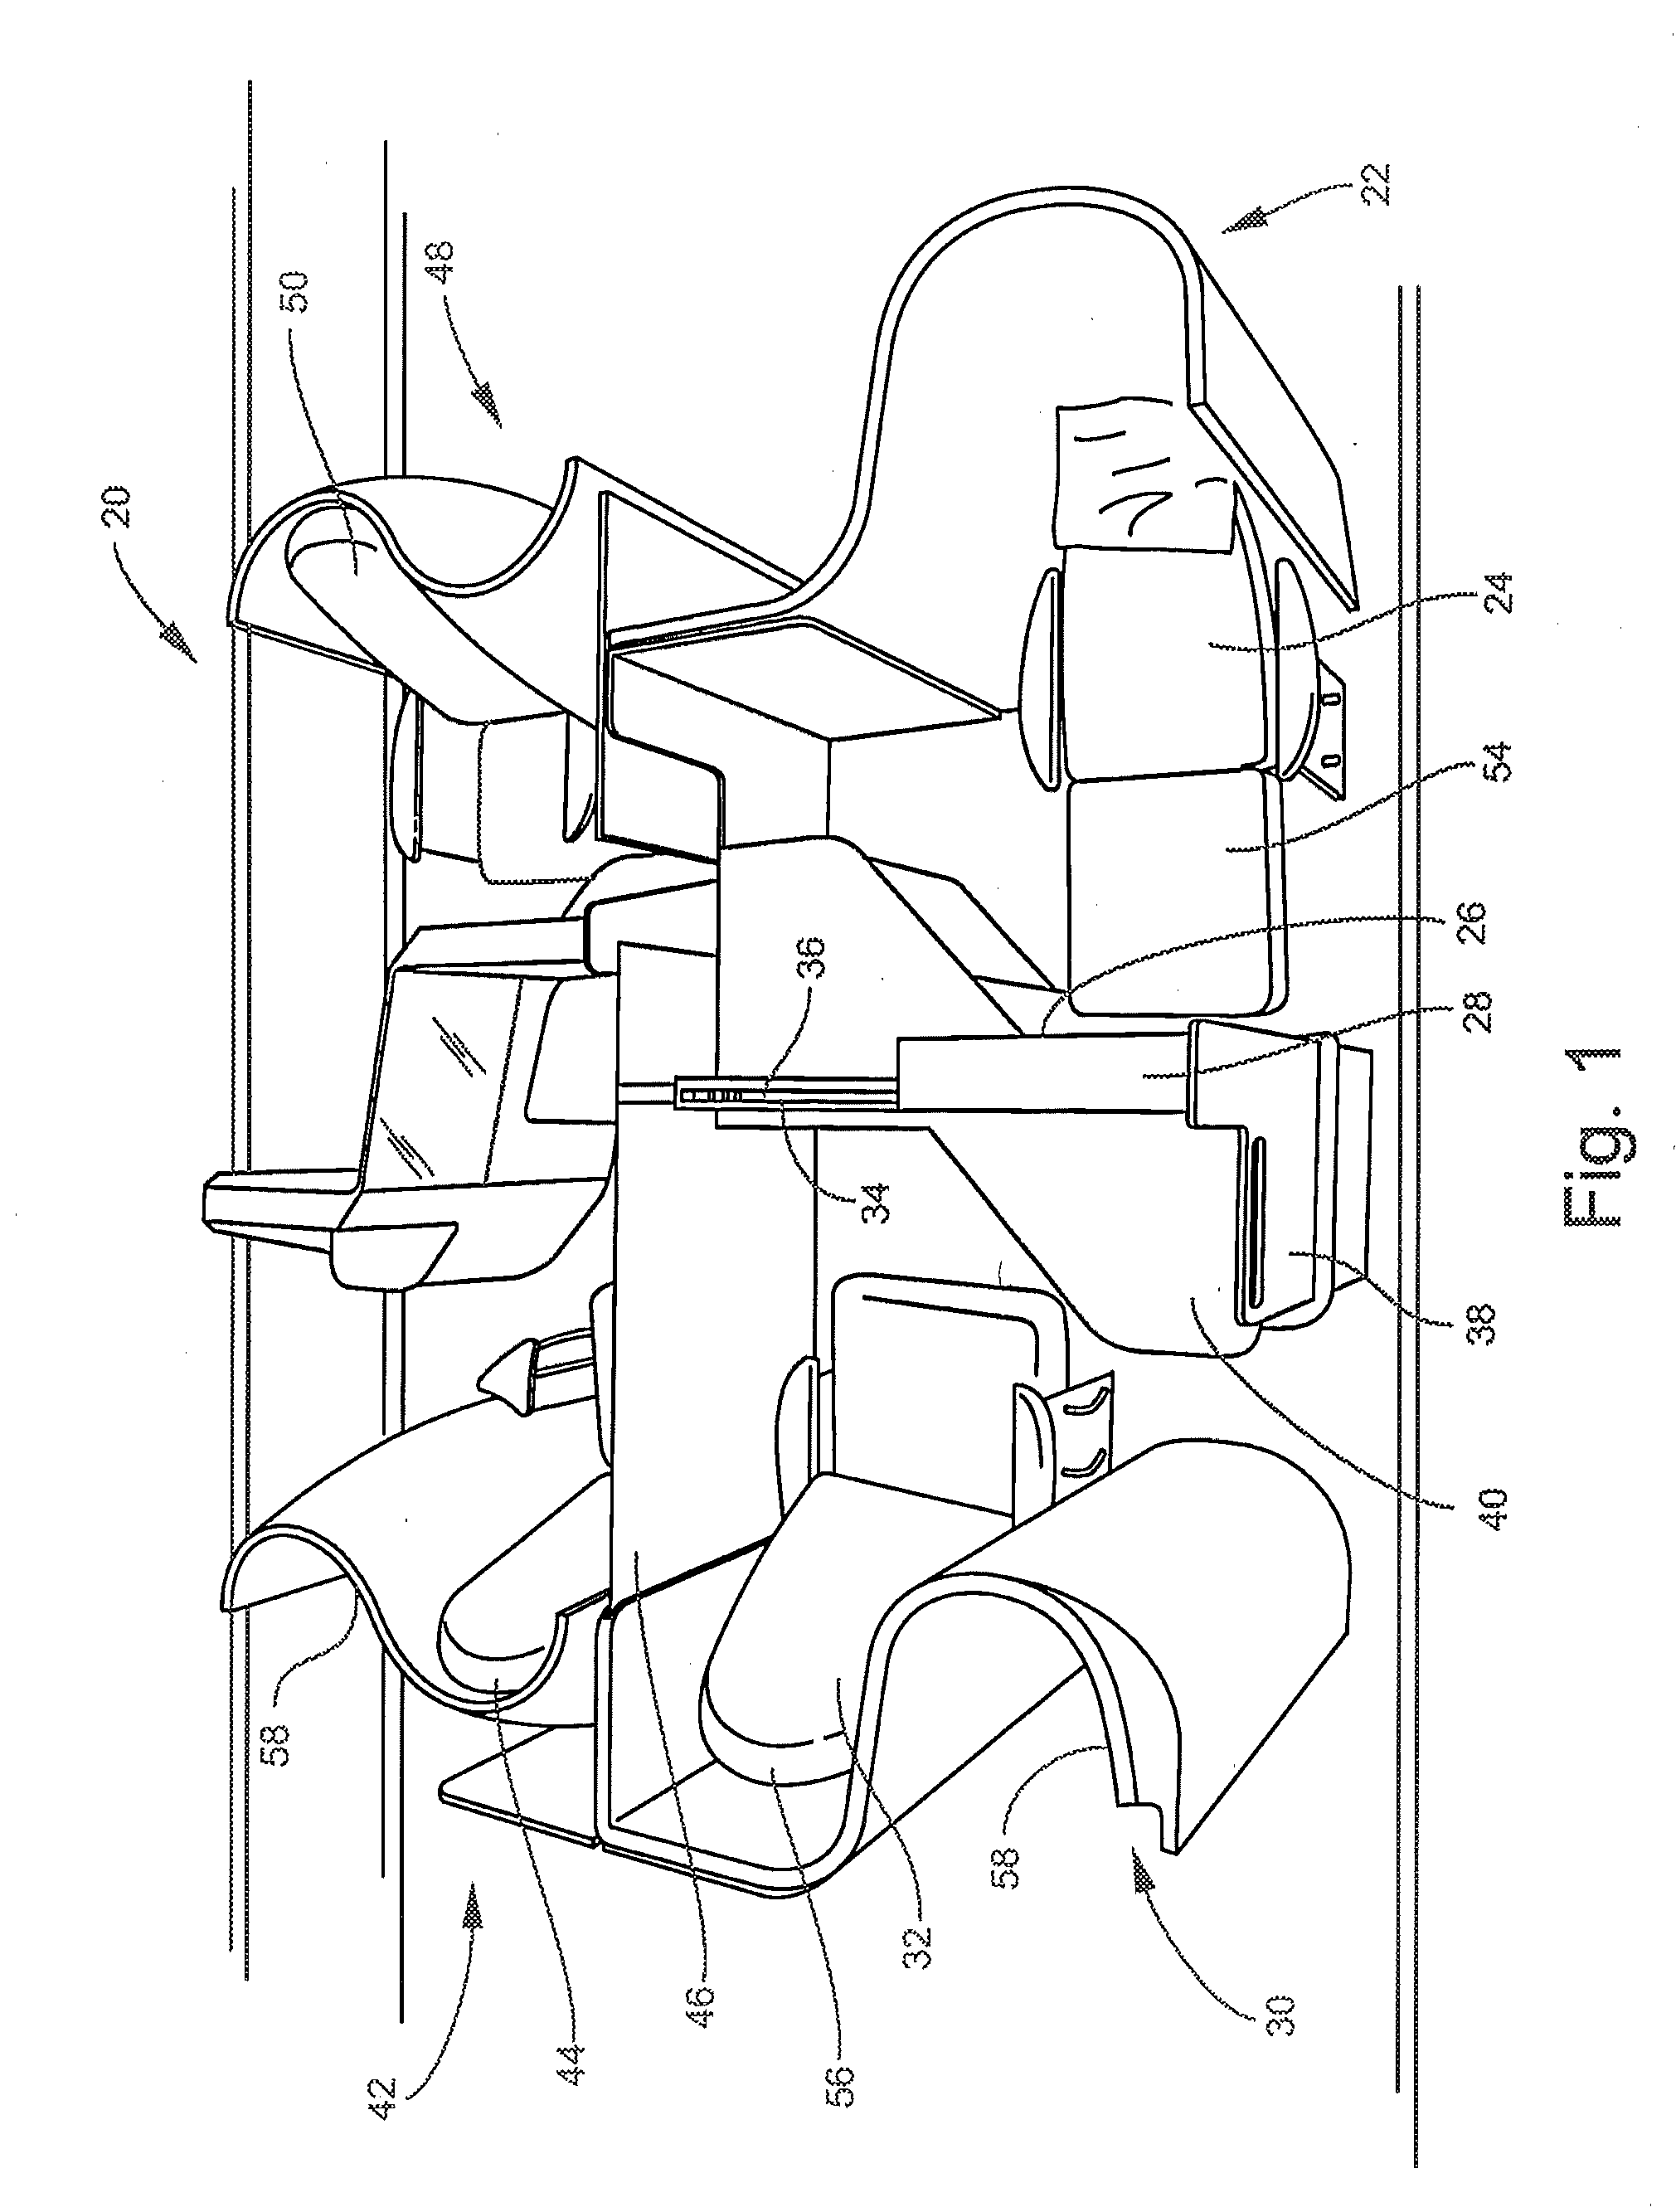 Passenger suite seating arrangement with moveable video monitor